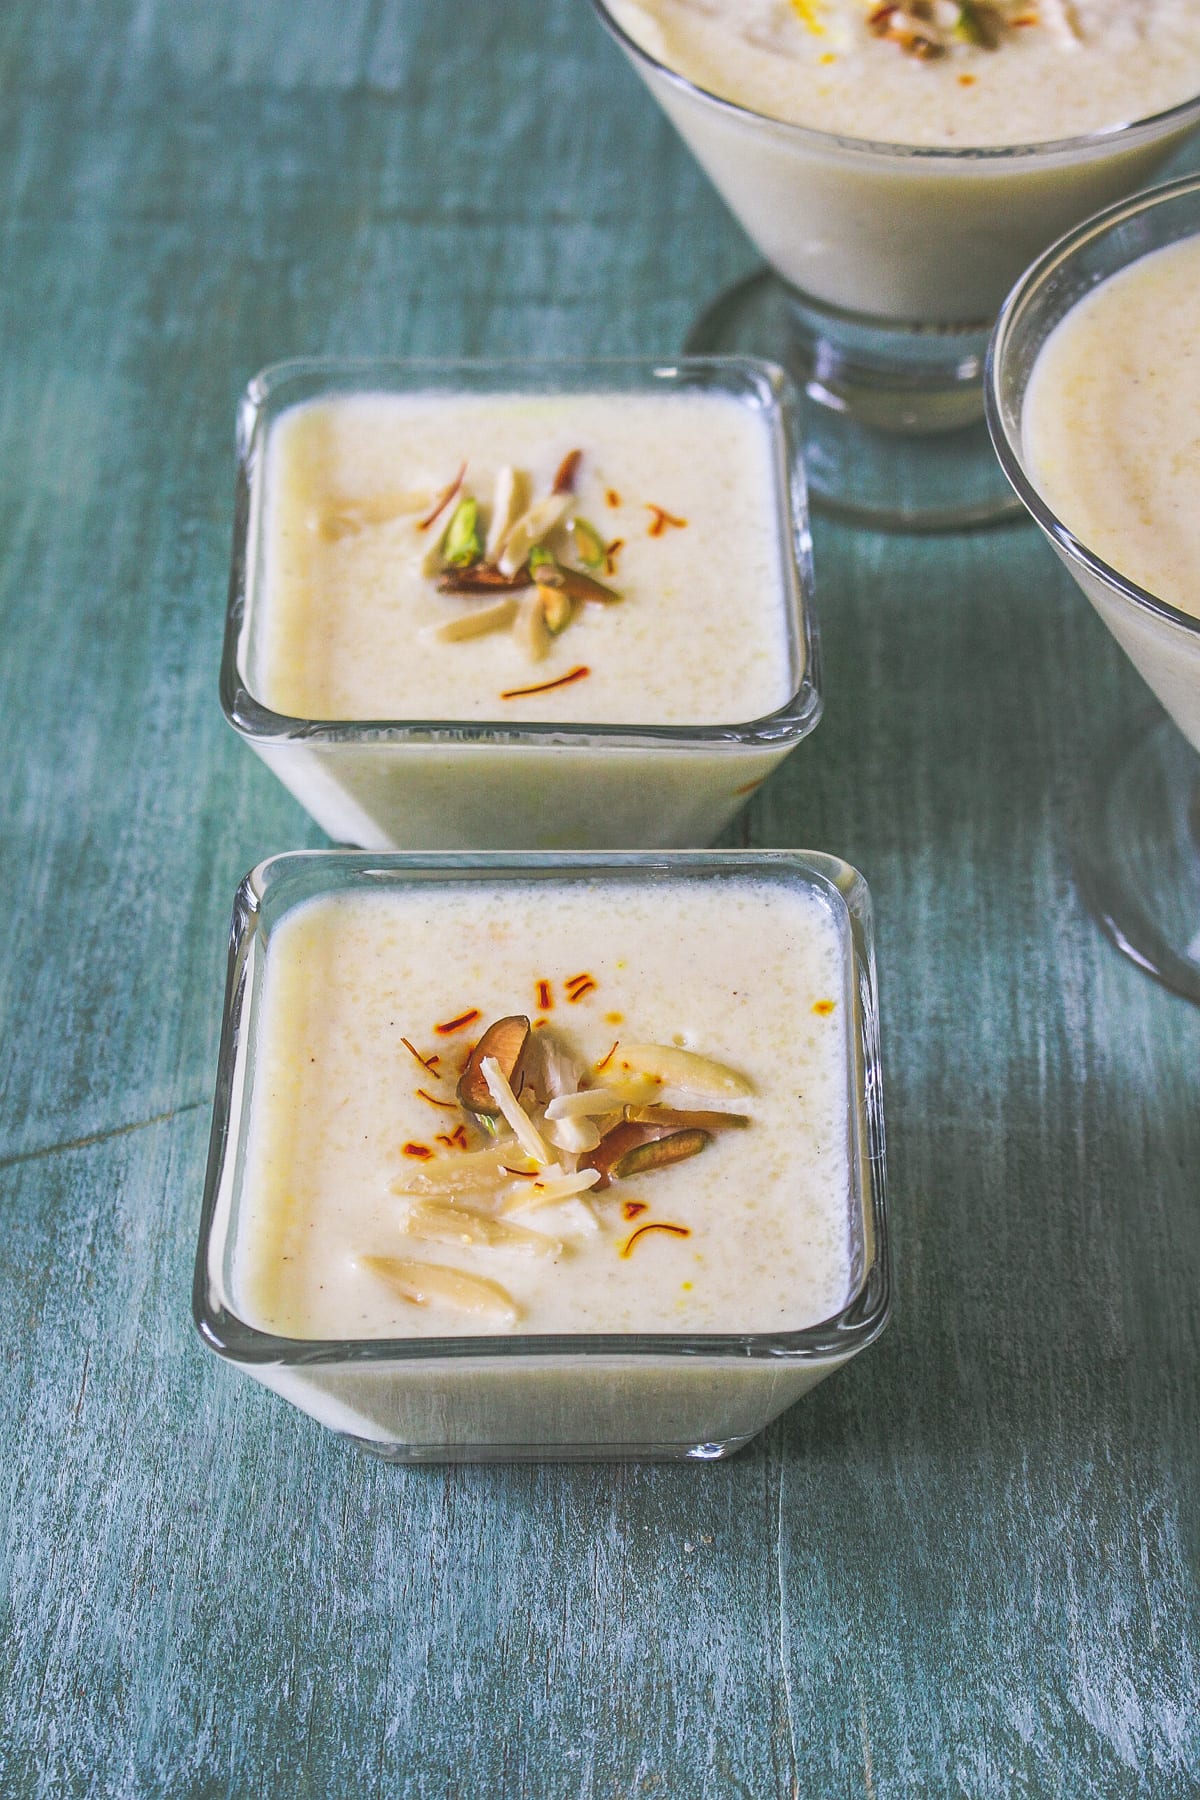 phirni in individual serving bowl garnish with sliced nuts and saffron.